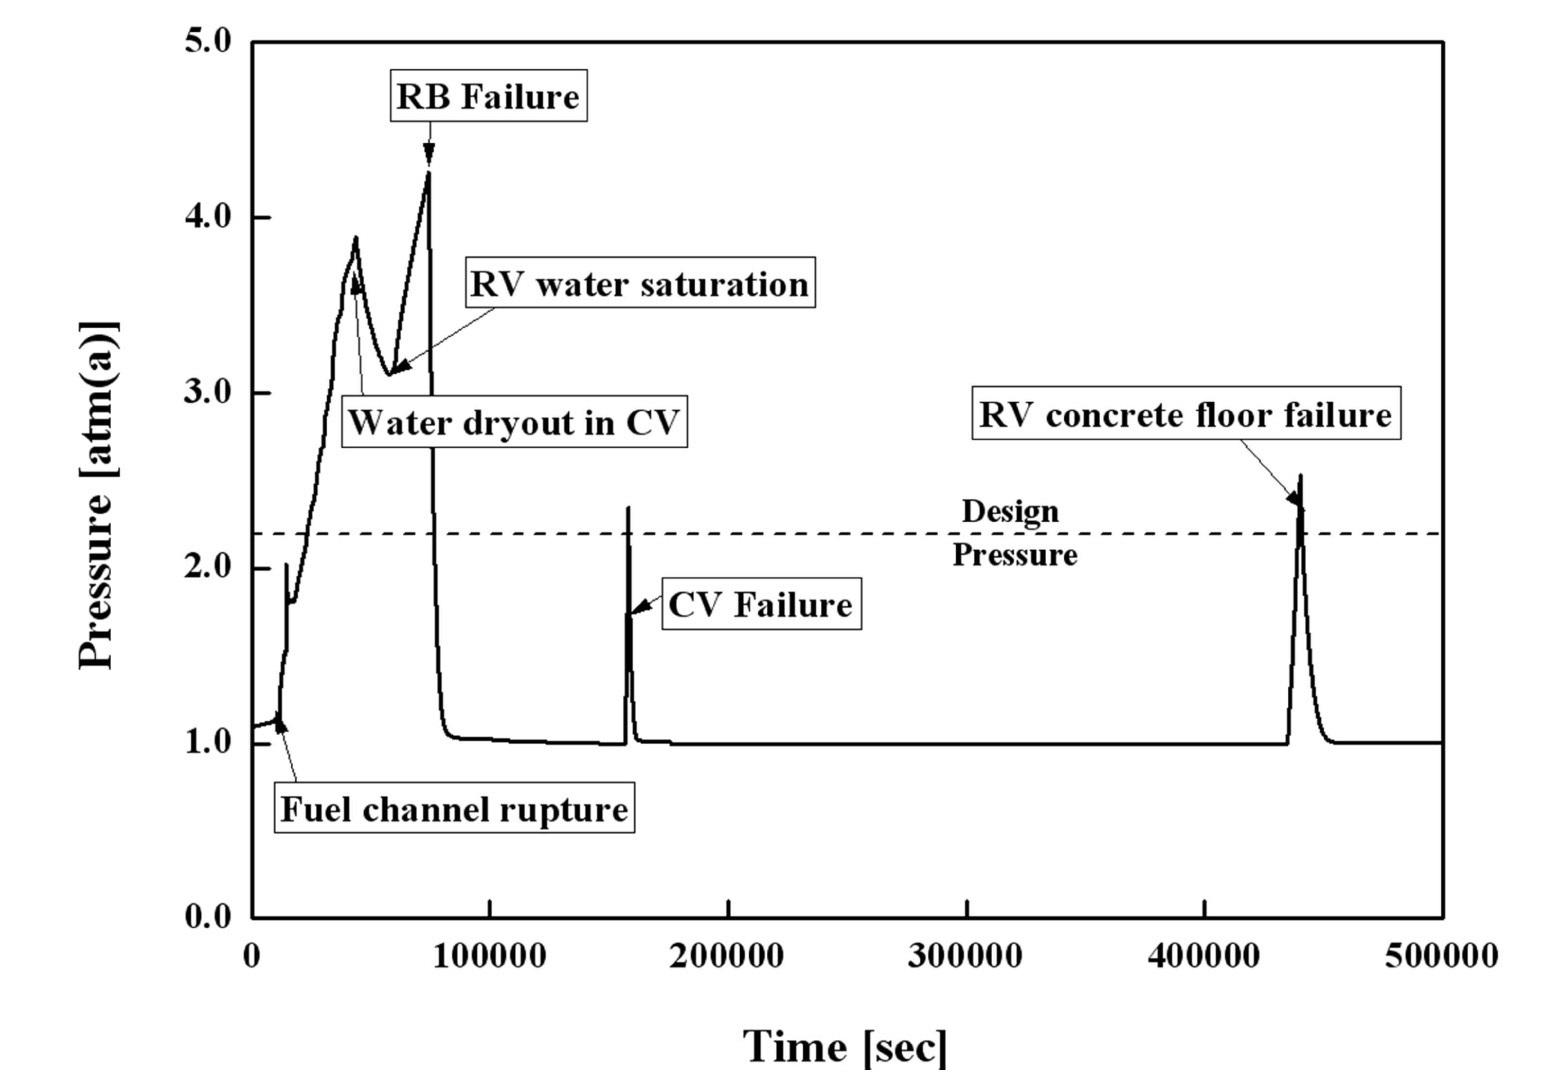 Reactor Building Pressure Response for Base SBO
Sequence